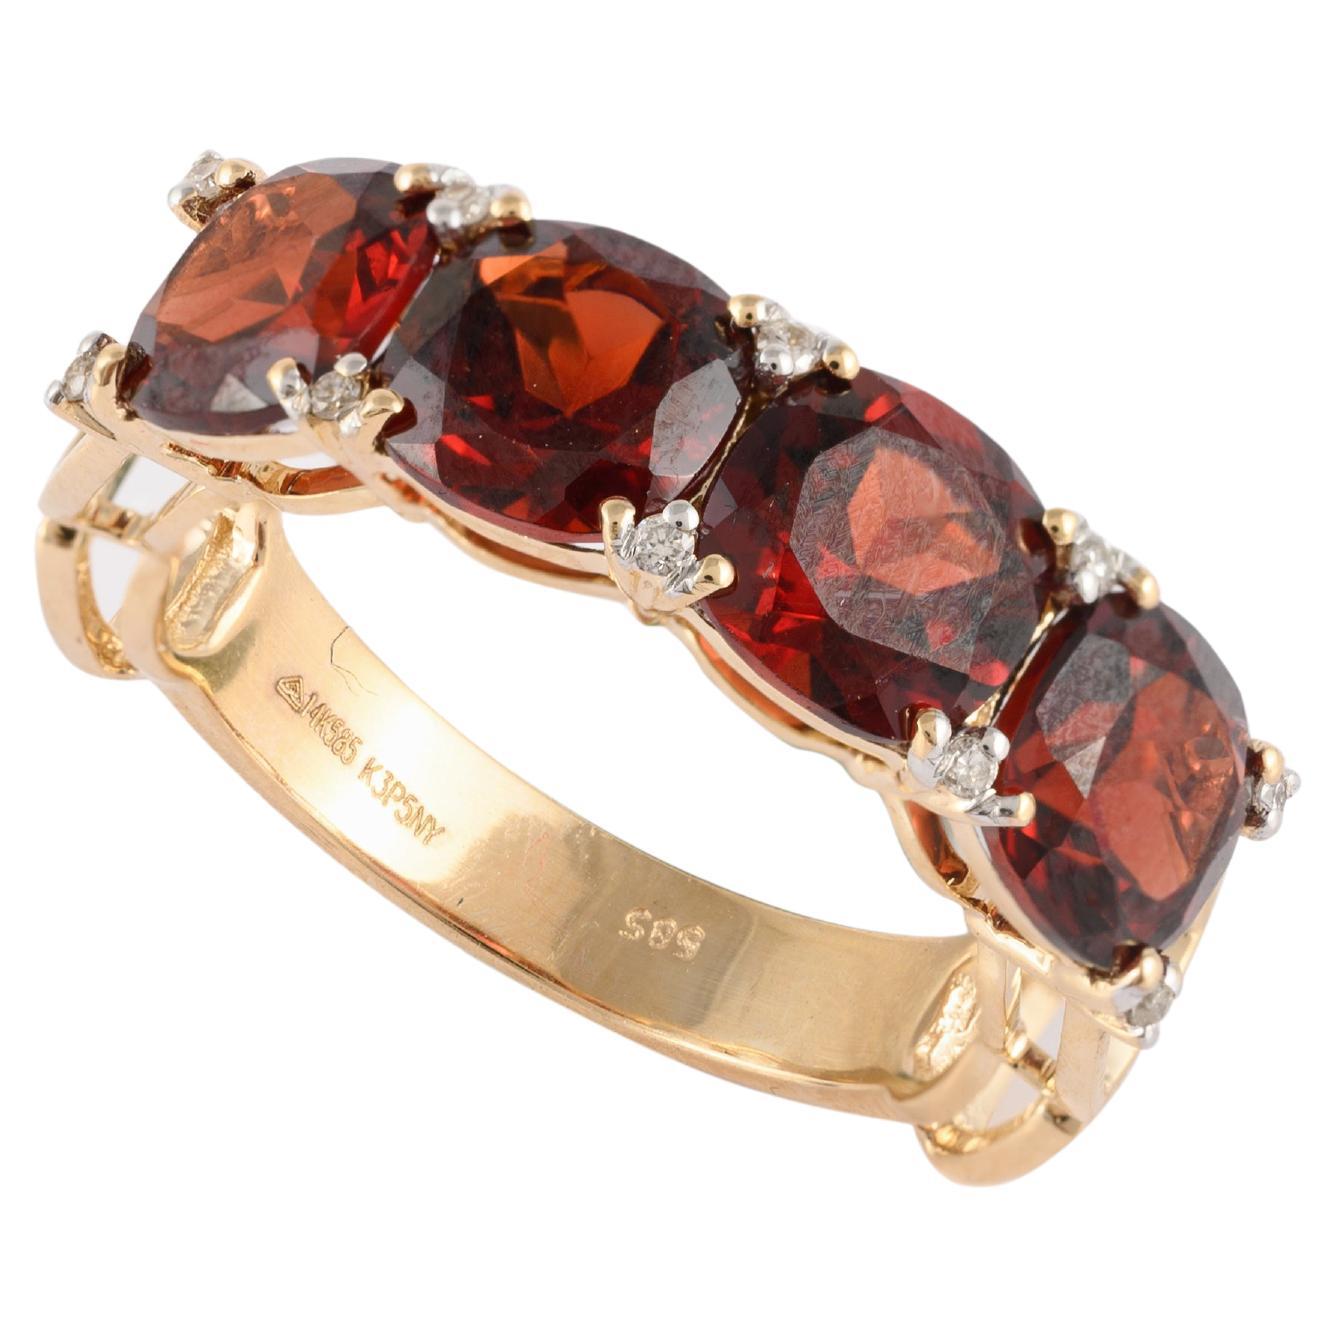 For Sale:  14k Solid Yellow Gold Natural 4.75 Carat Garnet Ring with Diamonds for Her